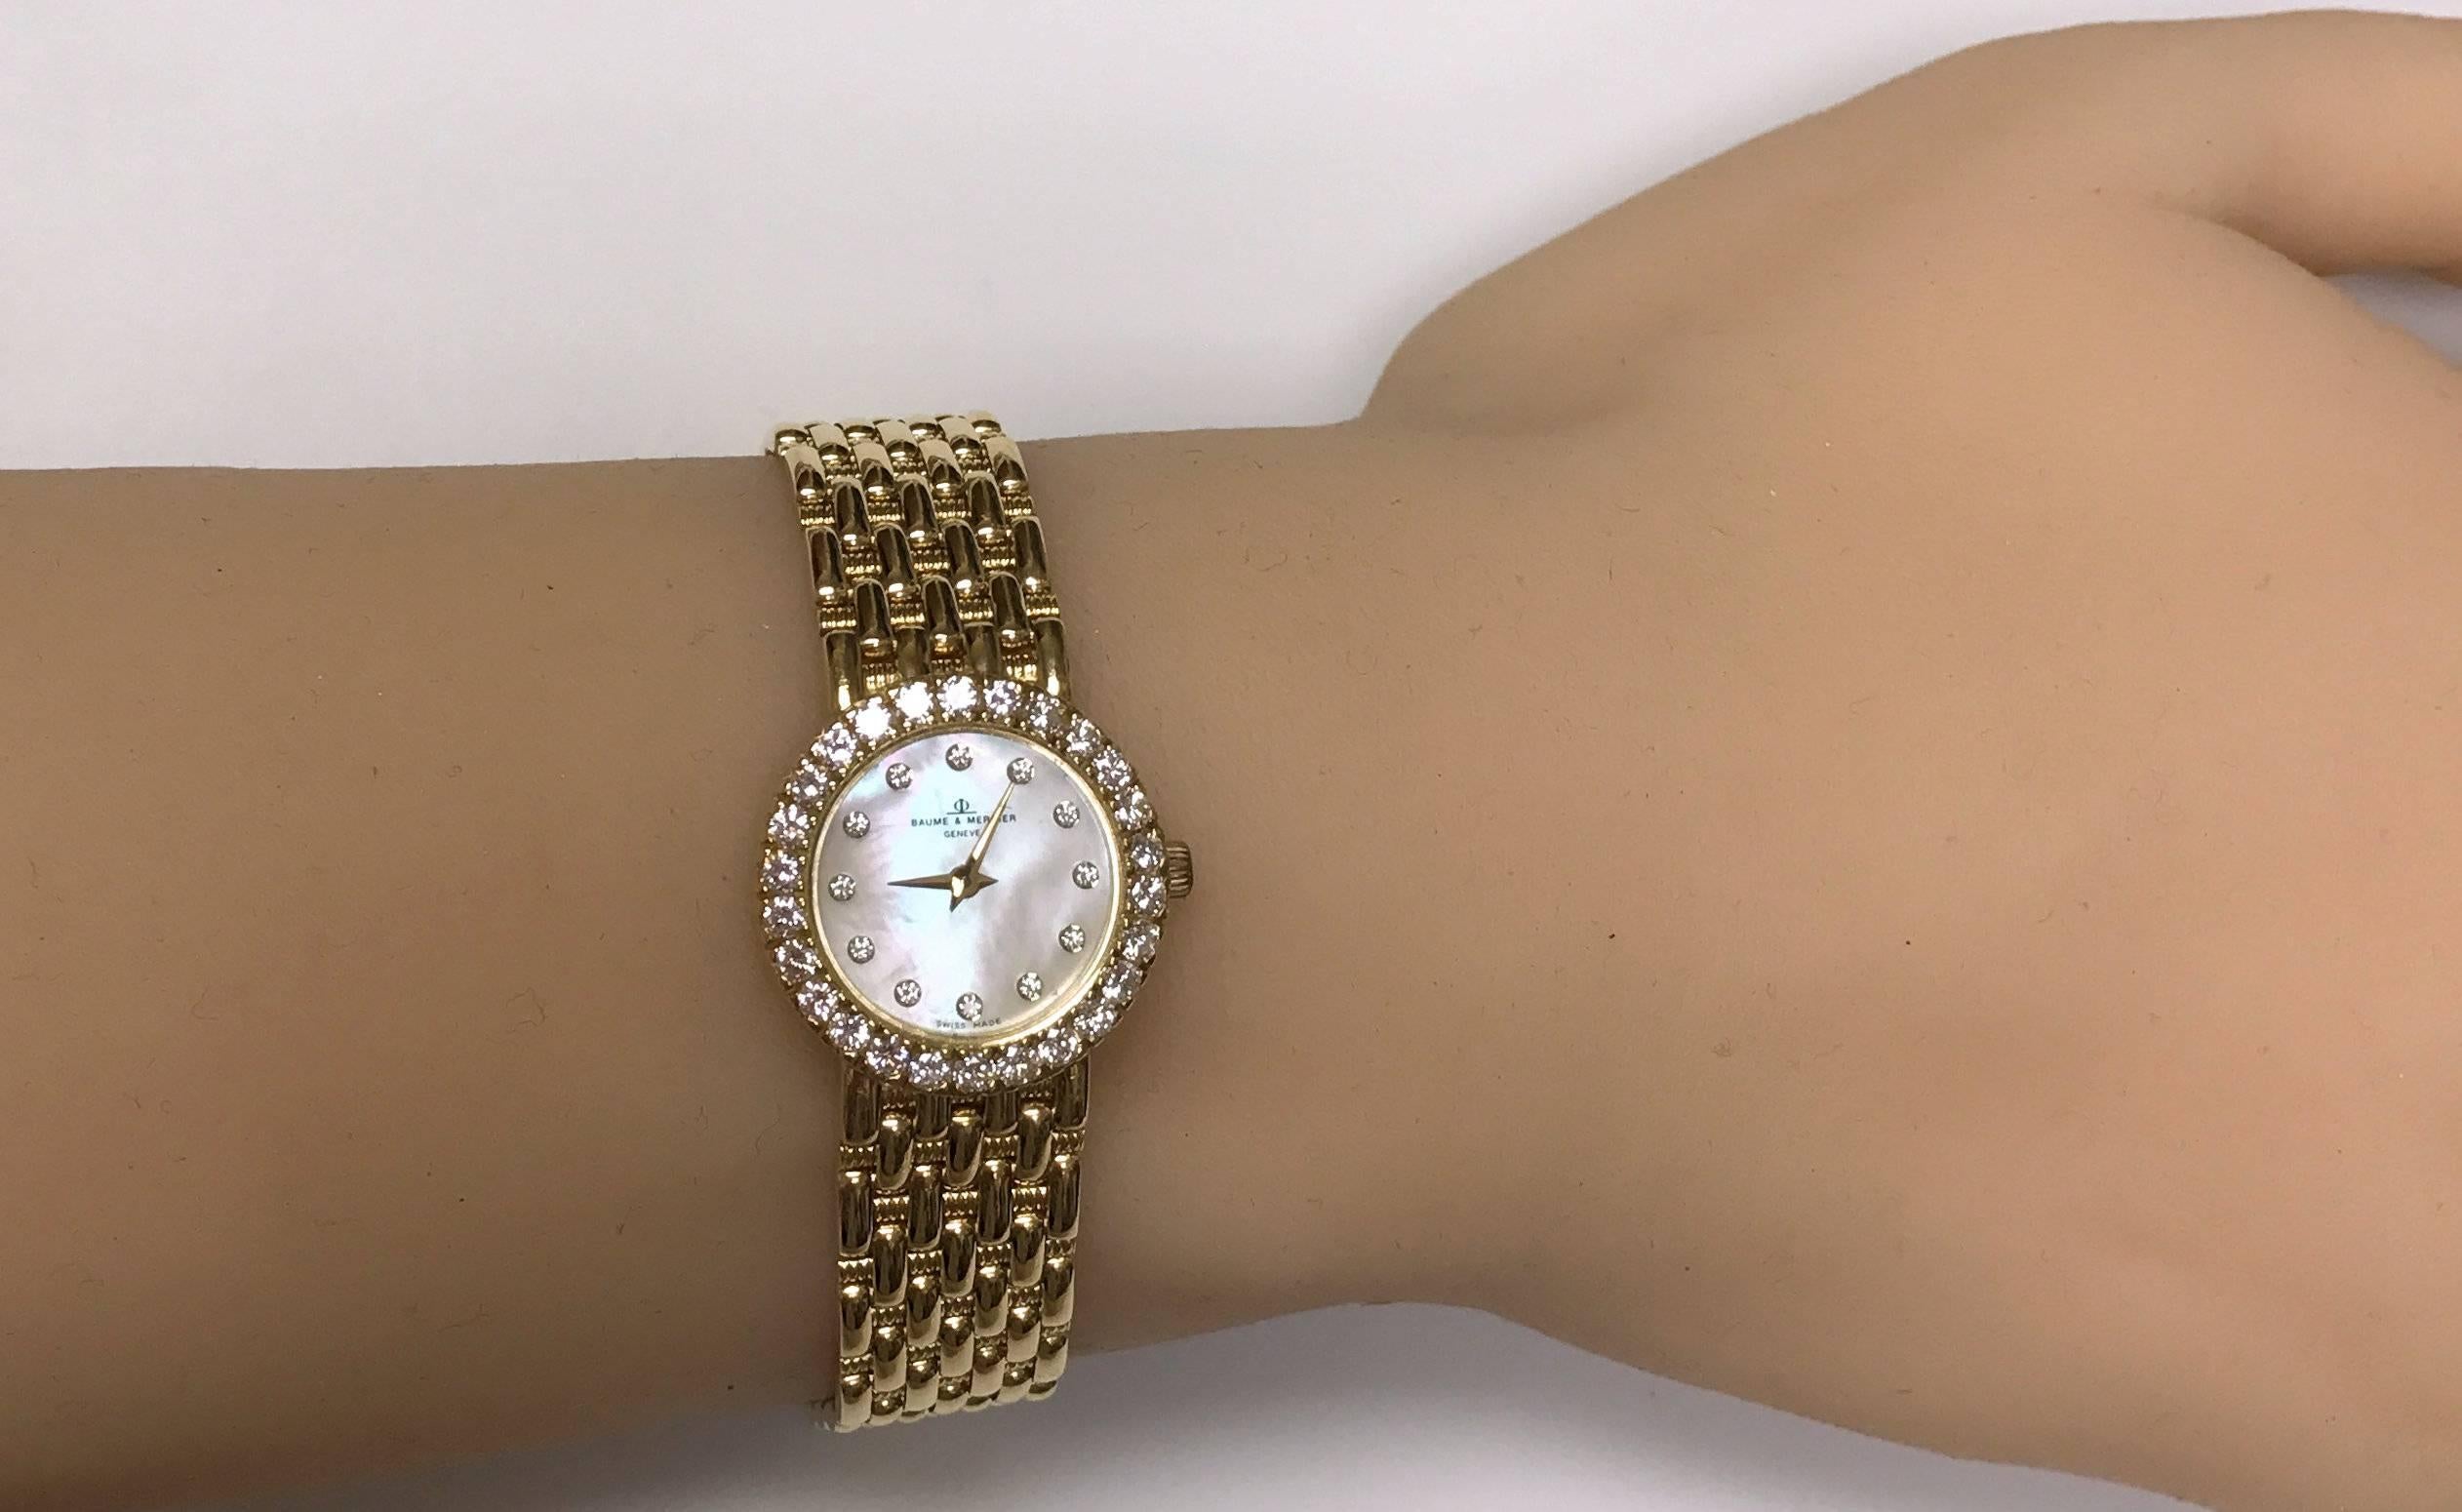 Mother of pearl diamond dial and bezel 18 Karat yellow gold Baume Mercier wrist watch.  Woven textured and high polish bracelet.  38 round diamonds approximately 1.00 carat total weight VS, G. 27.6 dwt. Clasp closes firmly, no stretch in the